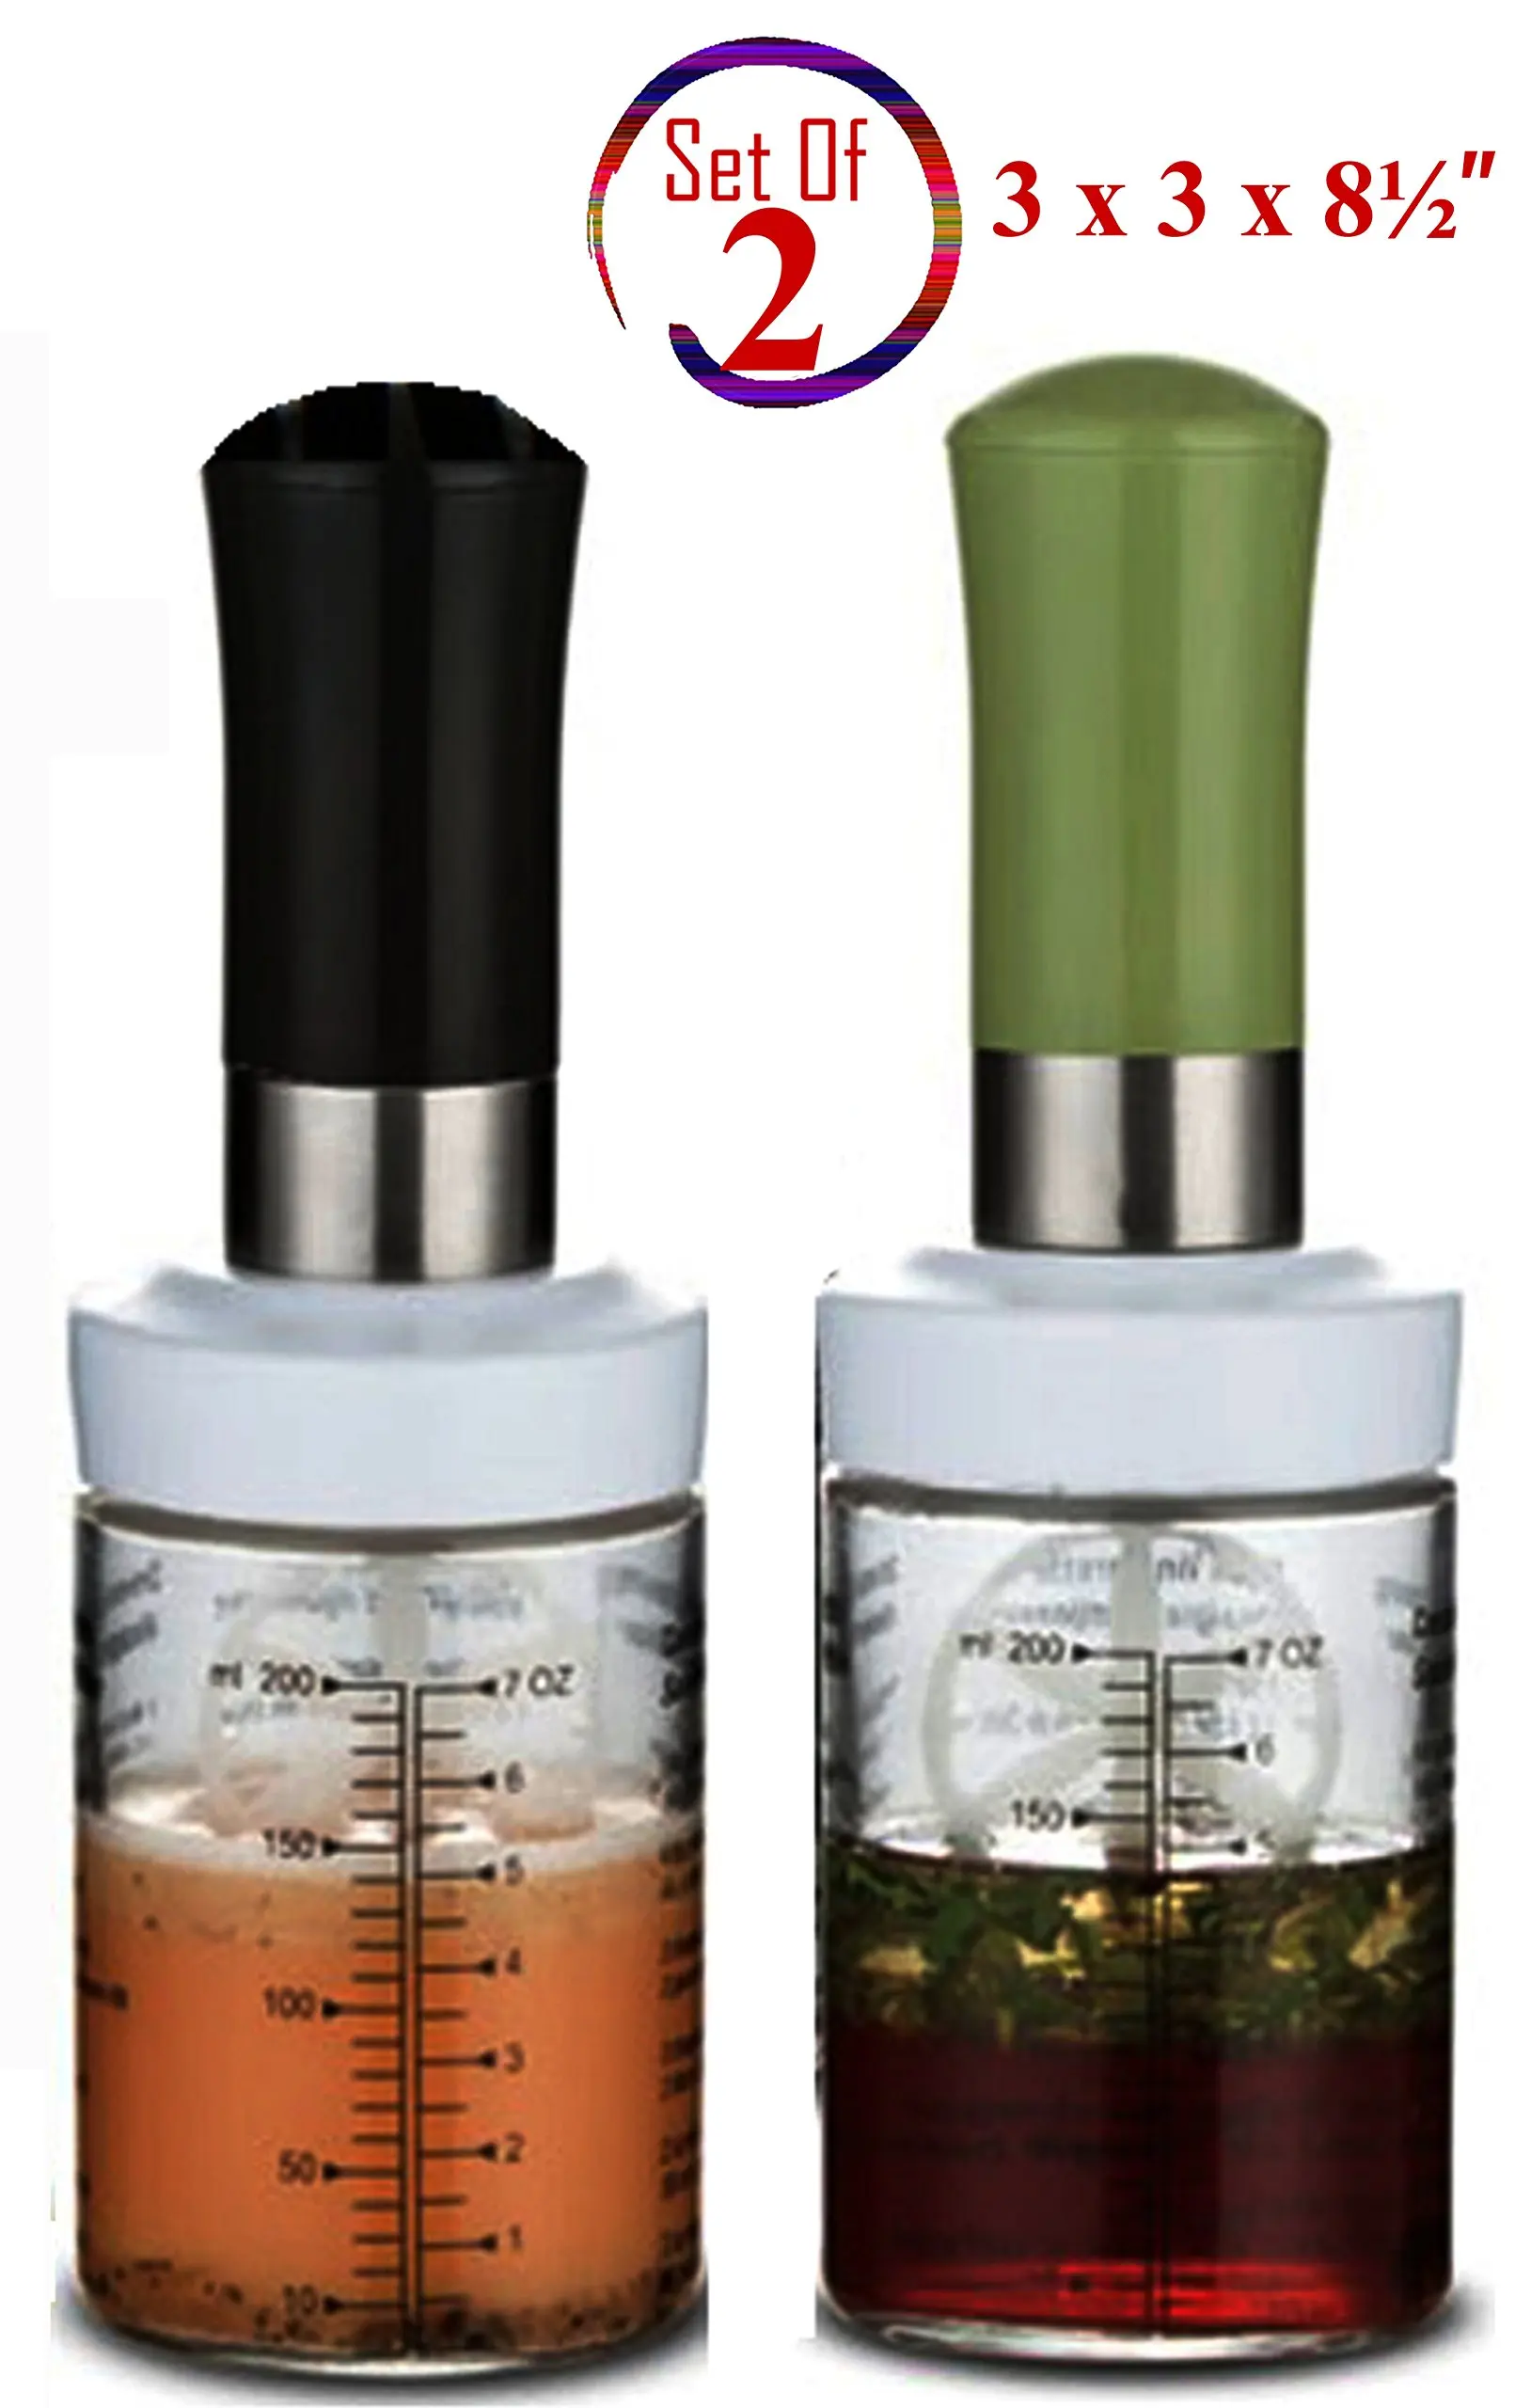 Norpro Measure Mix Salad Dressing Drink Sauce Shaker 2 Cup/500ml w/ Mixing Blade